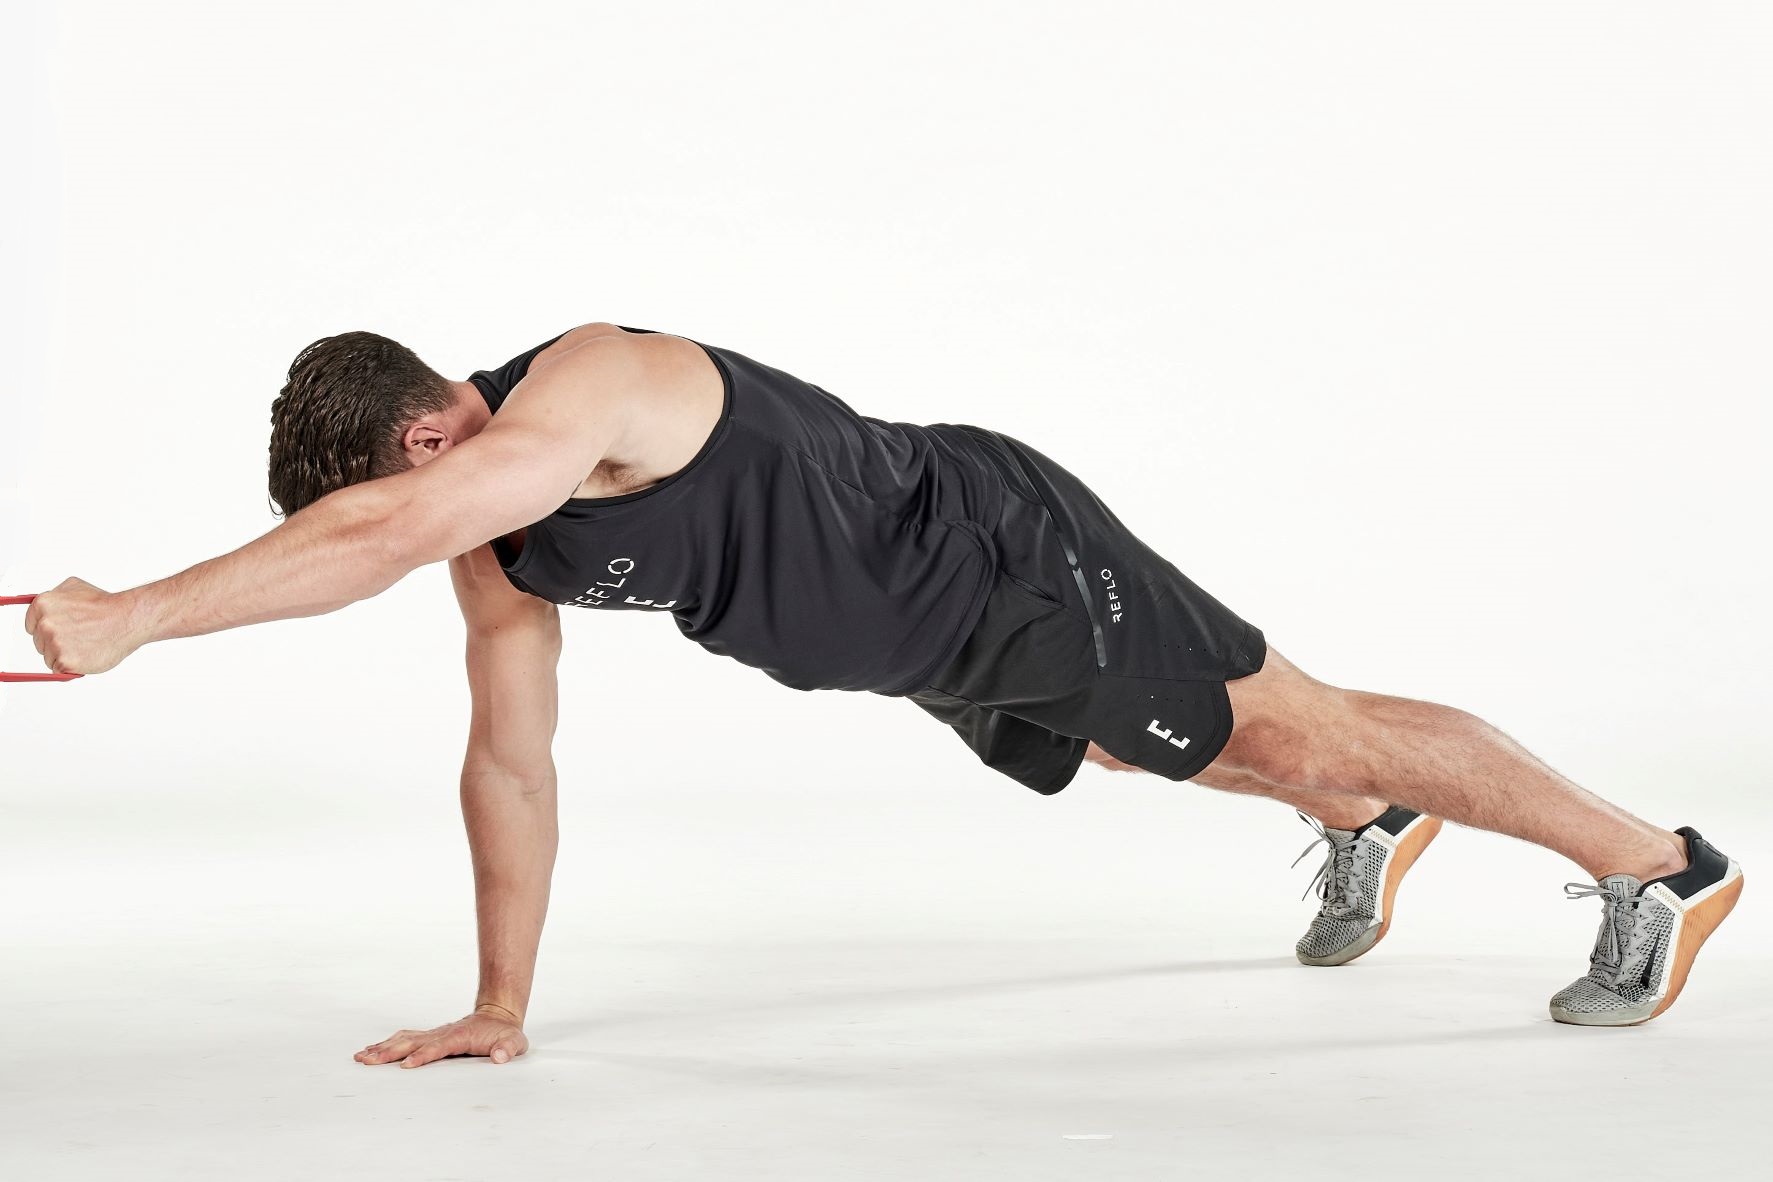 man demonstrating step one of plank row; in a plank position, one arm reaches out holding a secured resistance band; he wears a black fitness vest, black shorts and trainers